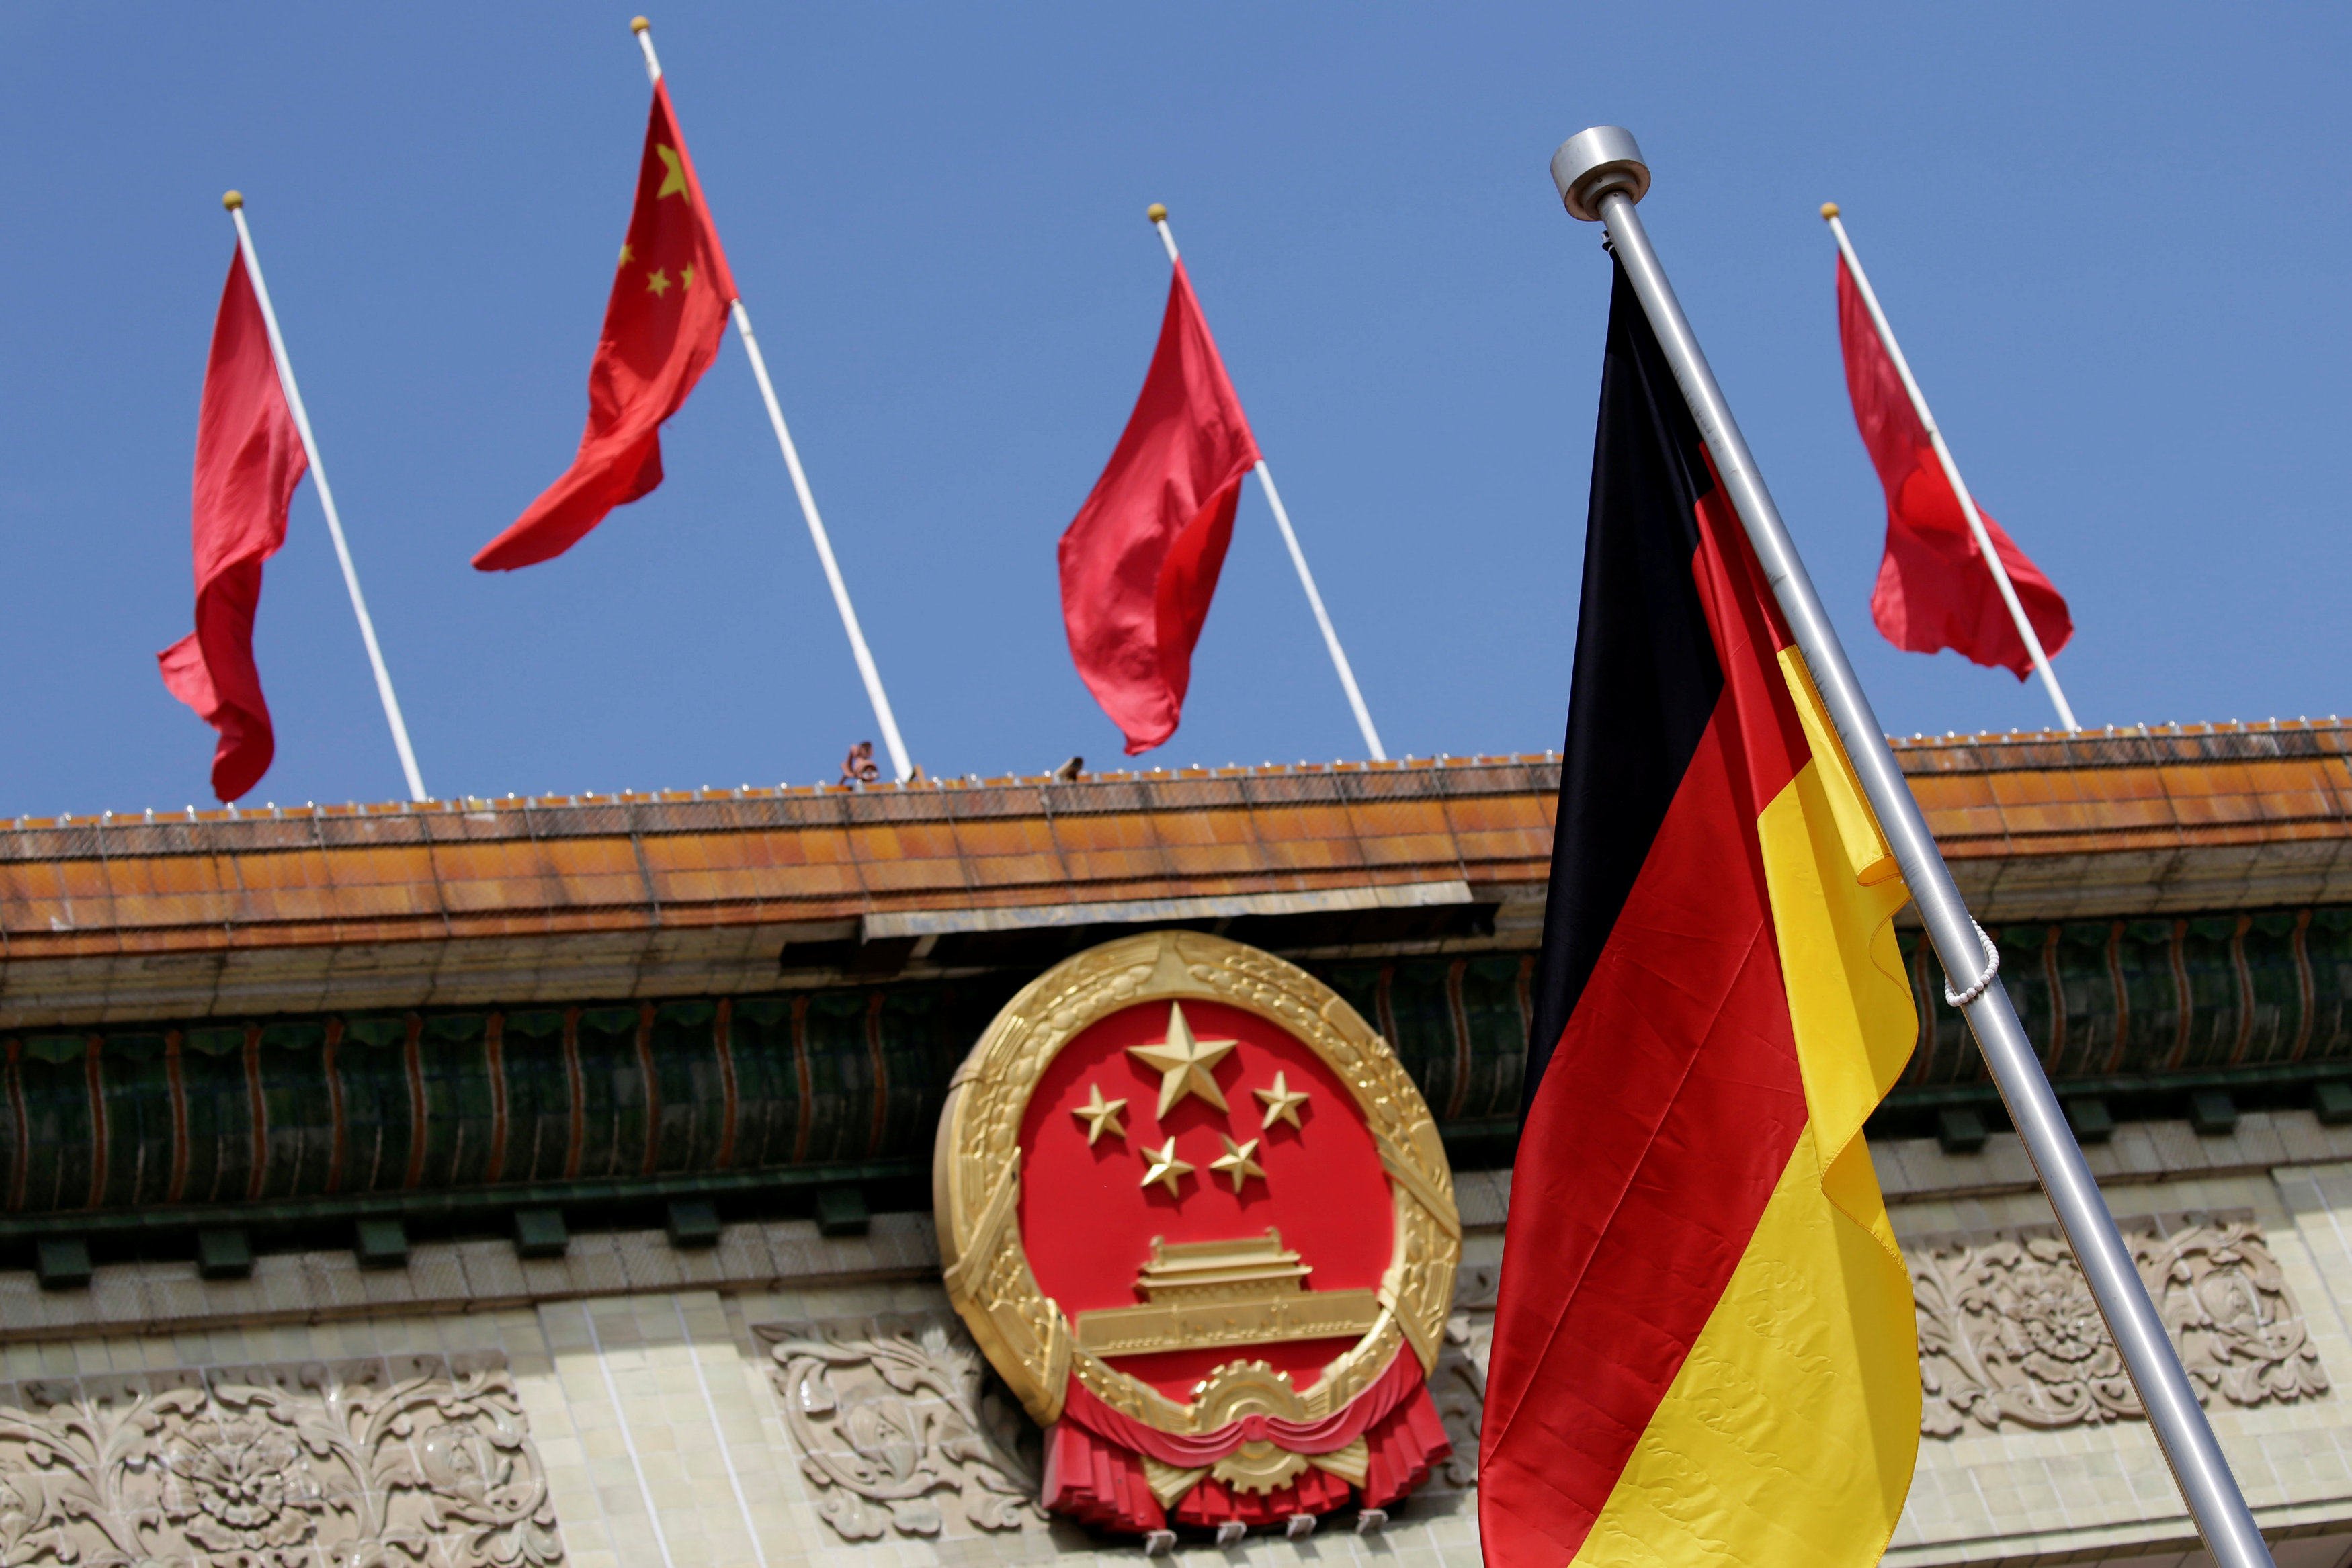 China has overtaken Germany in some exports, shifting trade balances and potentially contributing to higher tensions between the two countries. Photo: Reuters